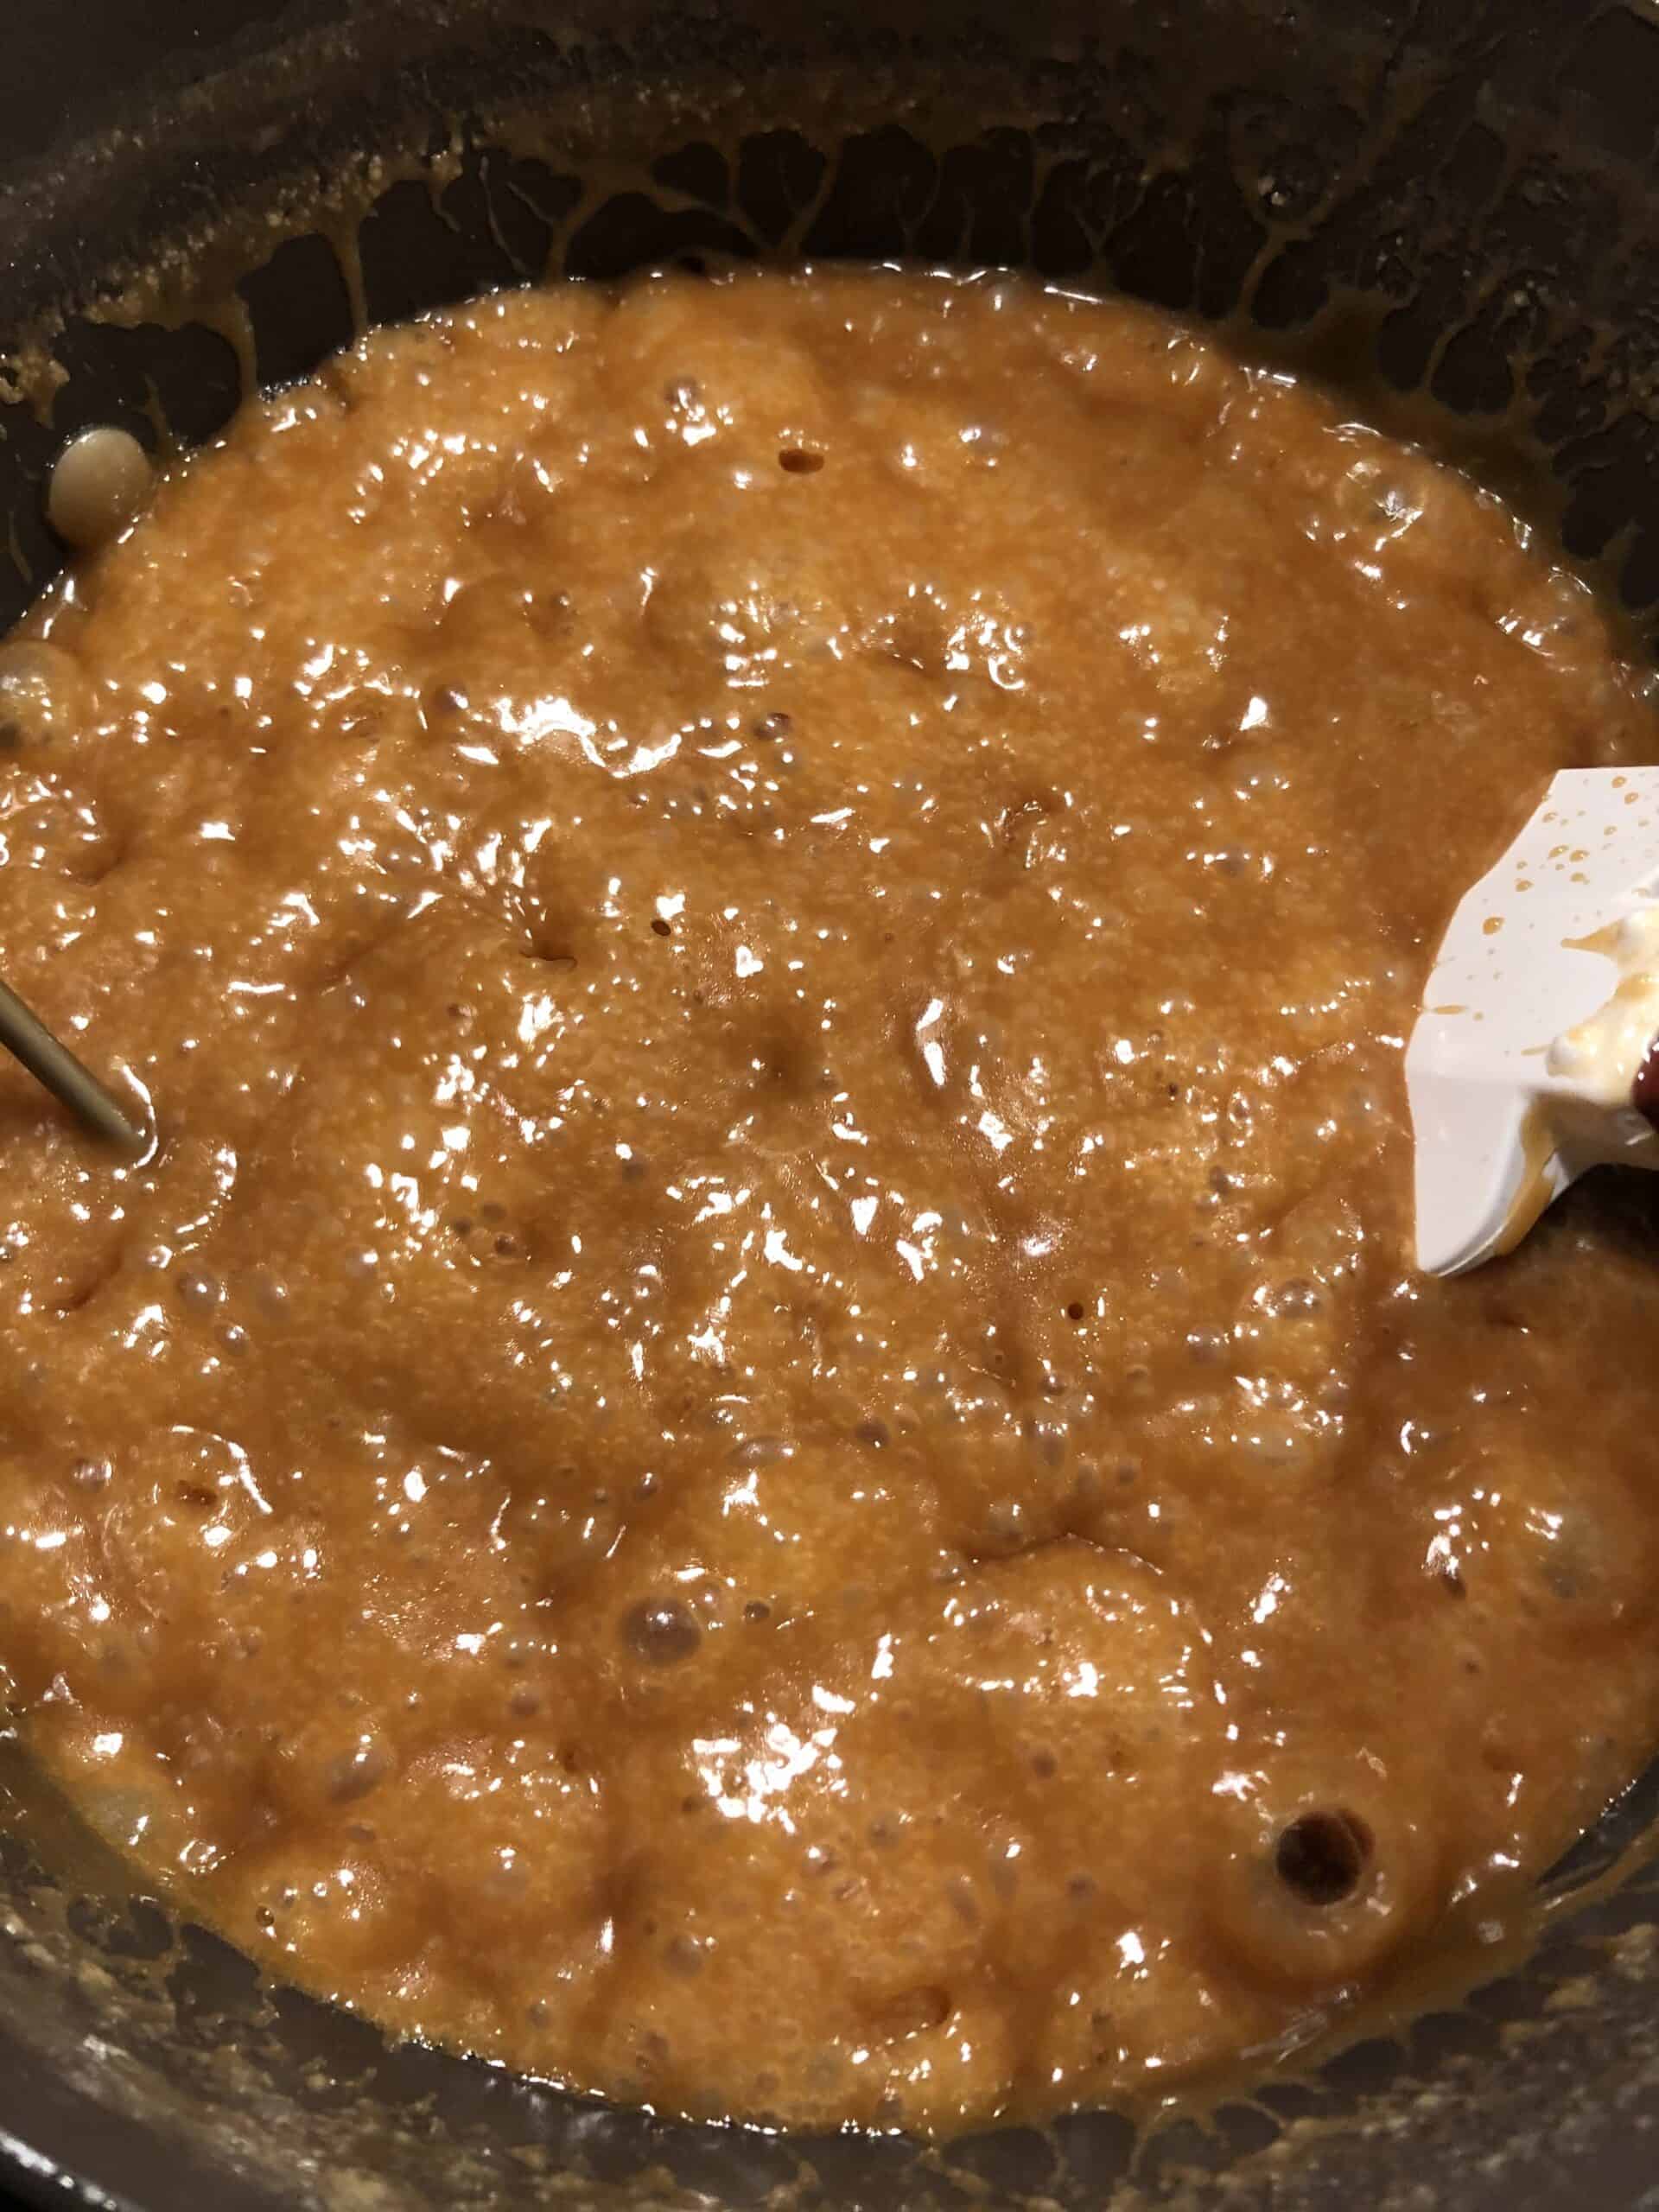 Stage 7 - Bring homemade caramel to 244°.